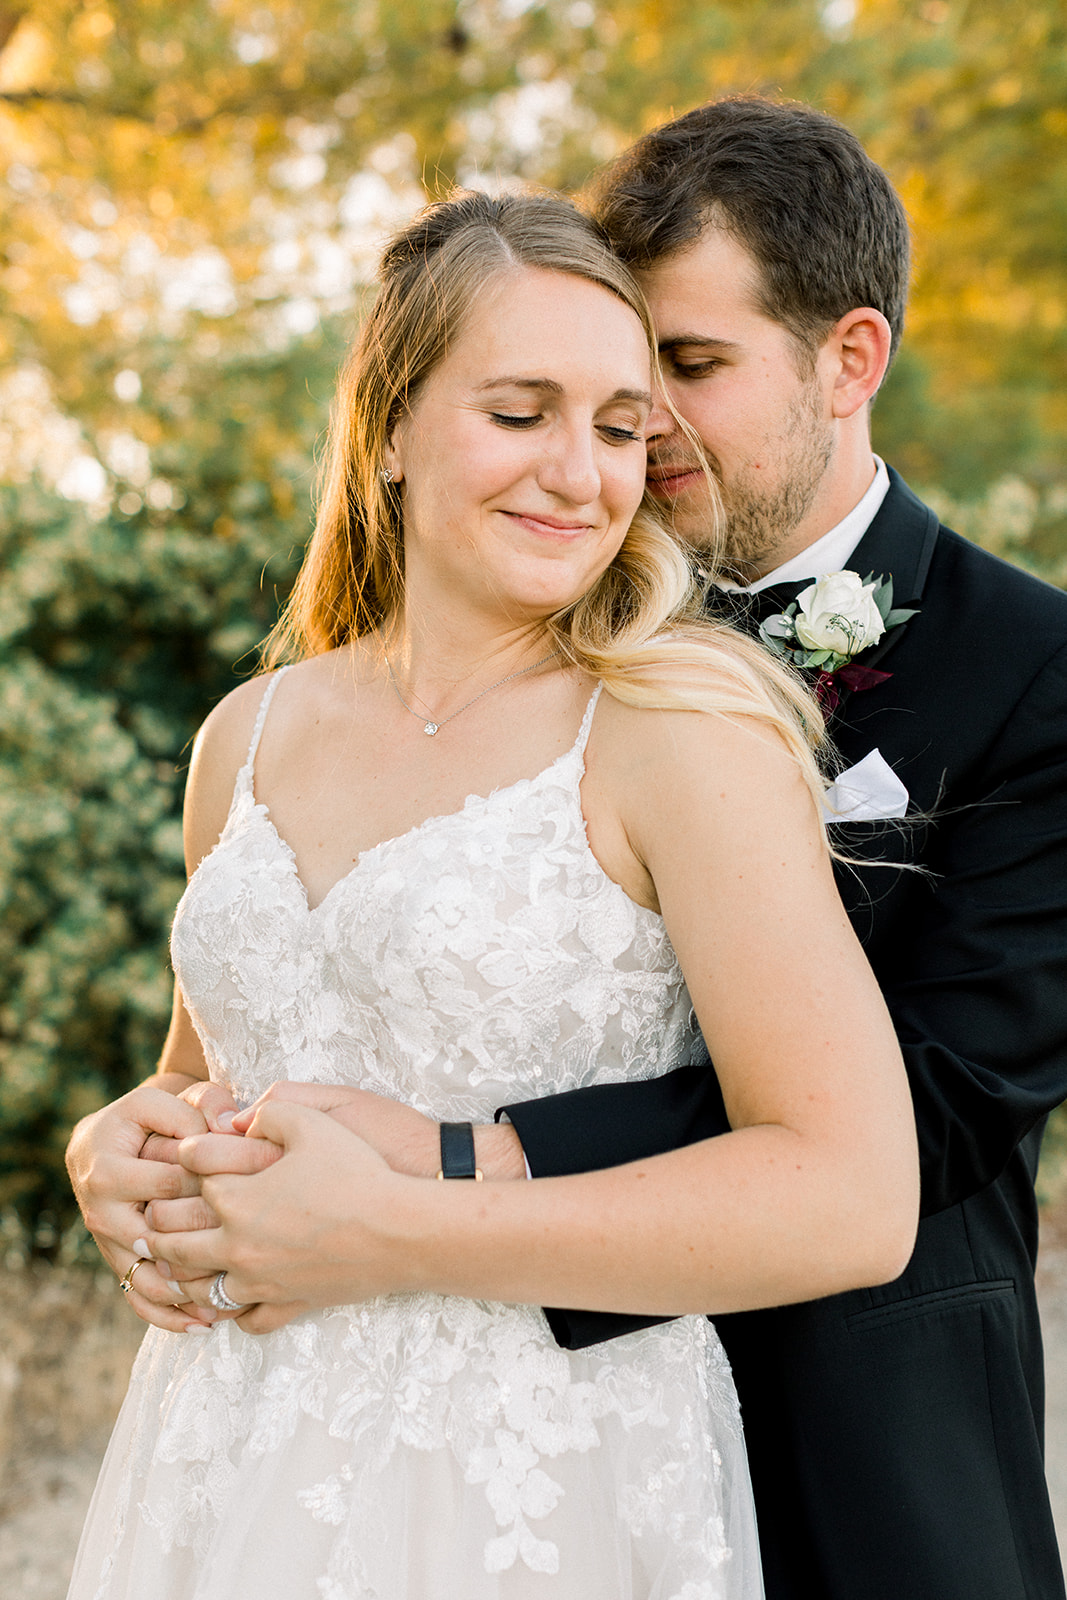 Hartley Farms Wedding Photo and Video: Cherish Every Moment